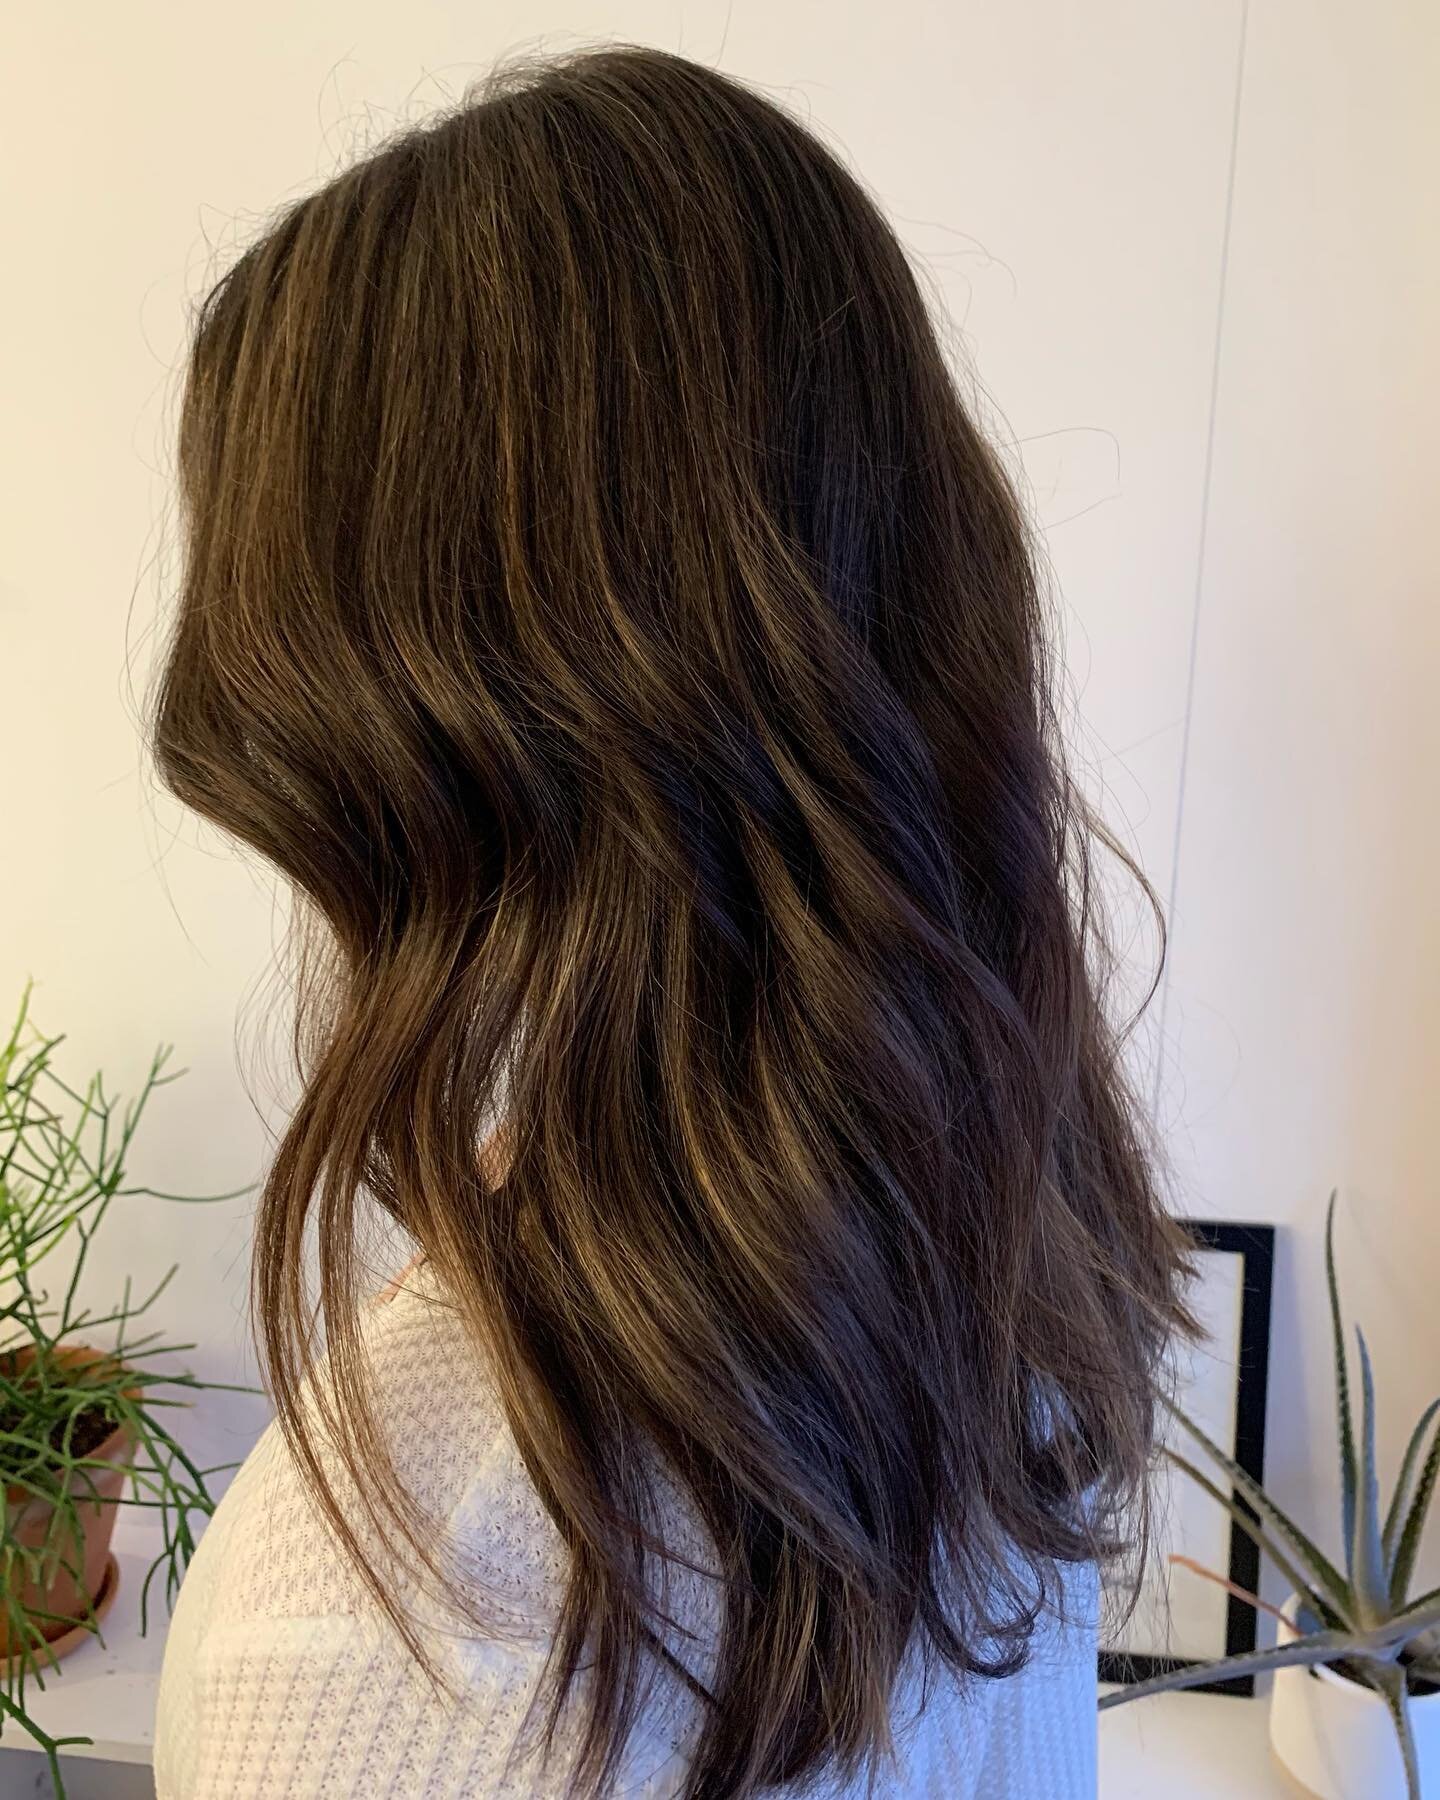 Haircut and color transformation- once again didn&rsquo;t take the before pick. I&rsquo;ll find one soon ha! @lizzieapgar #hairoftheweek #babylights #brunettehair #libertyvillesalon #chicagohairstylist #mainstreetlibertyville